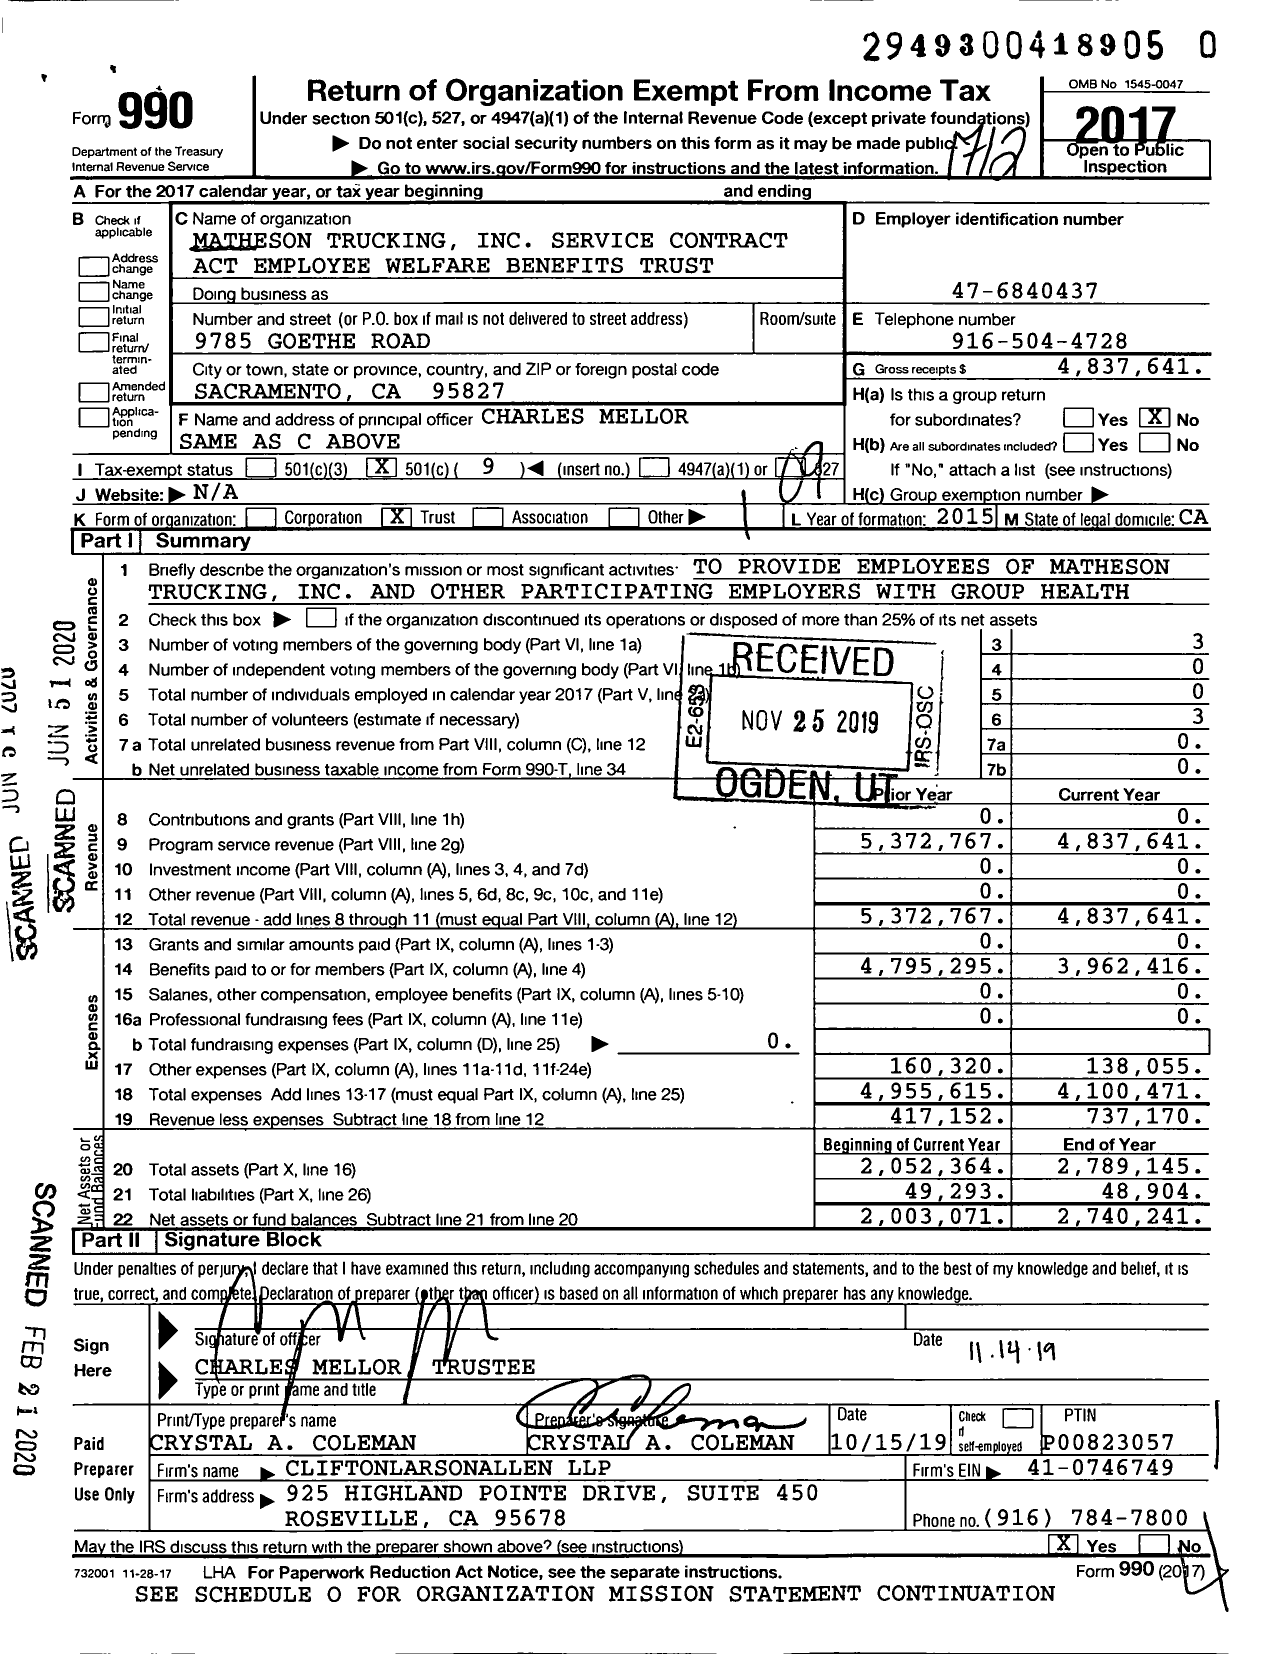 Image of first page of 2017 Form 990O for Matheson Trucking Service Contract Act Employee Welfare Benefits Trust